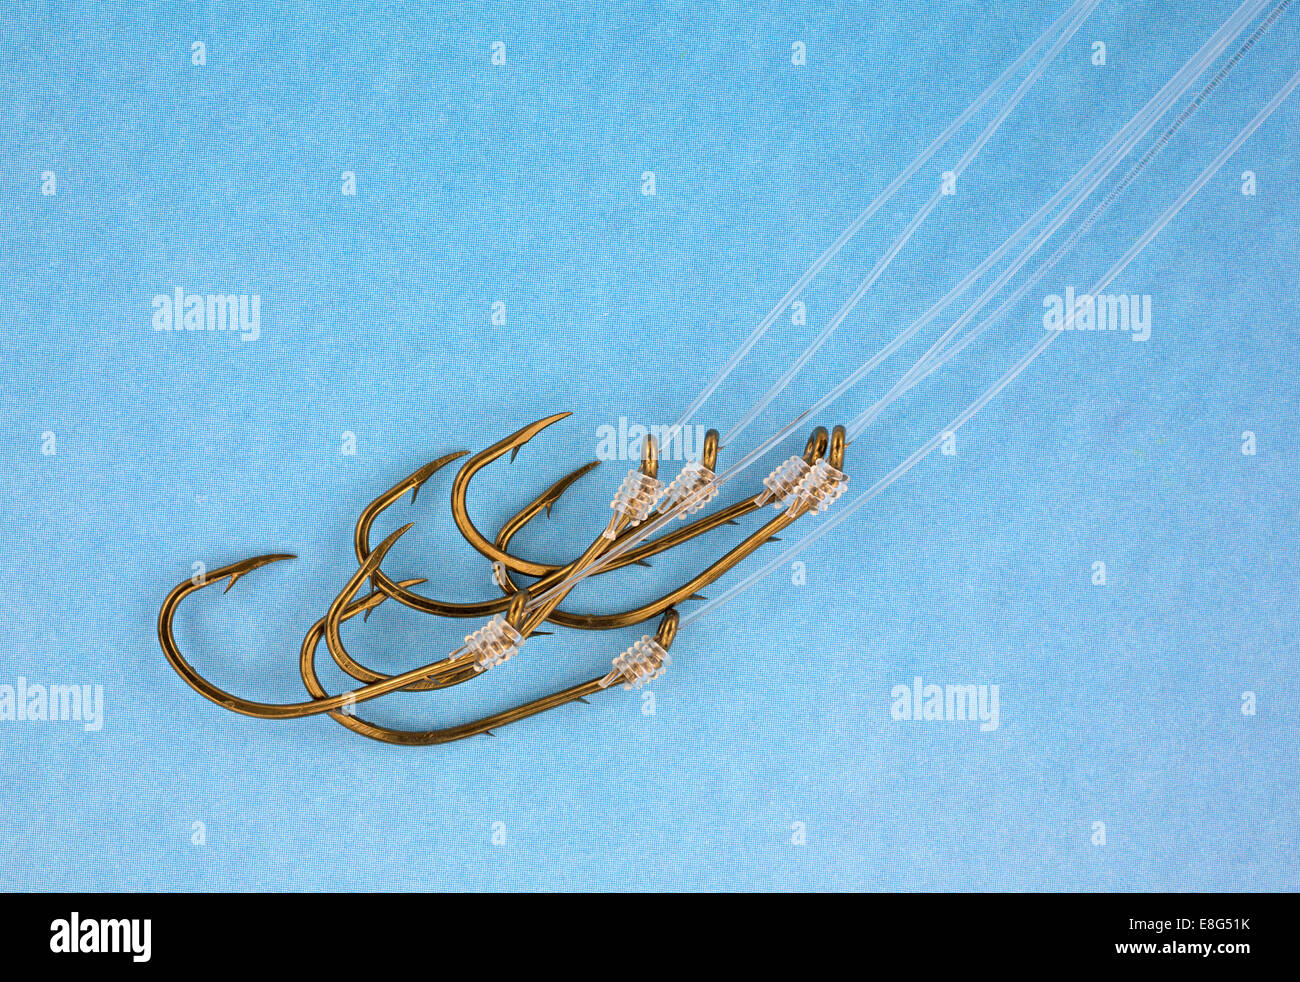 A very close view of barbed fish hooks with nylon leaders on a blue background. Stock Photo